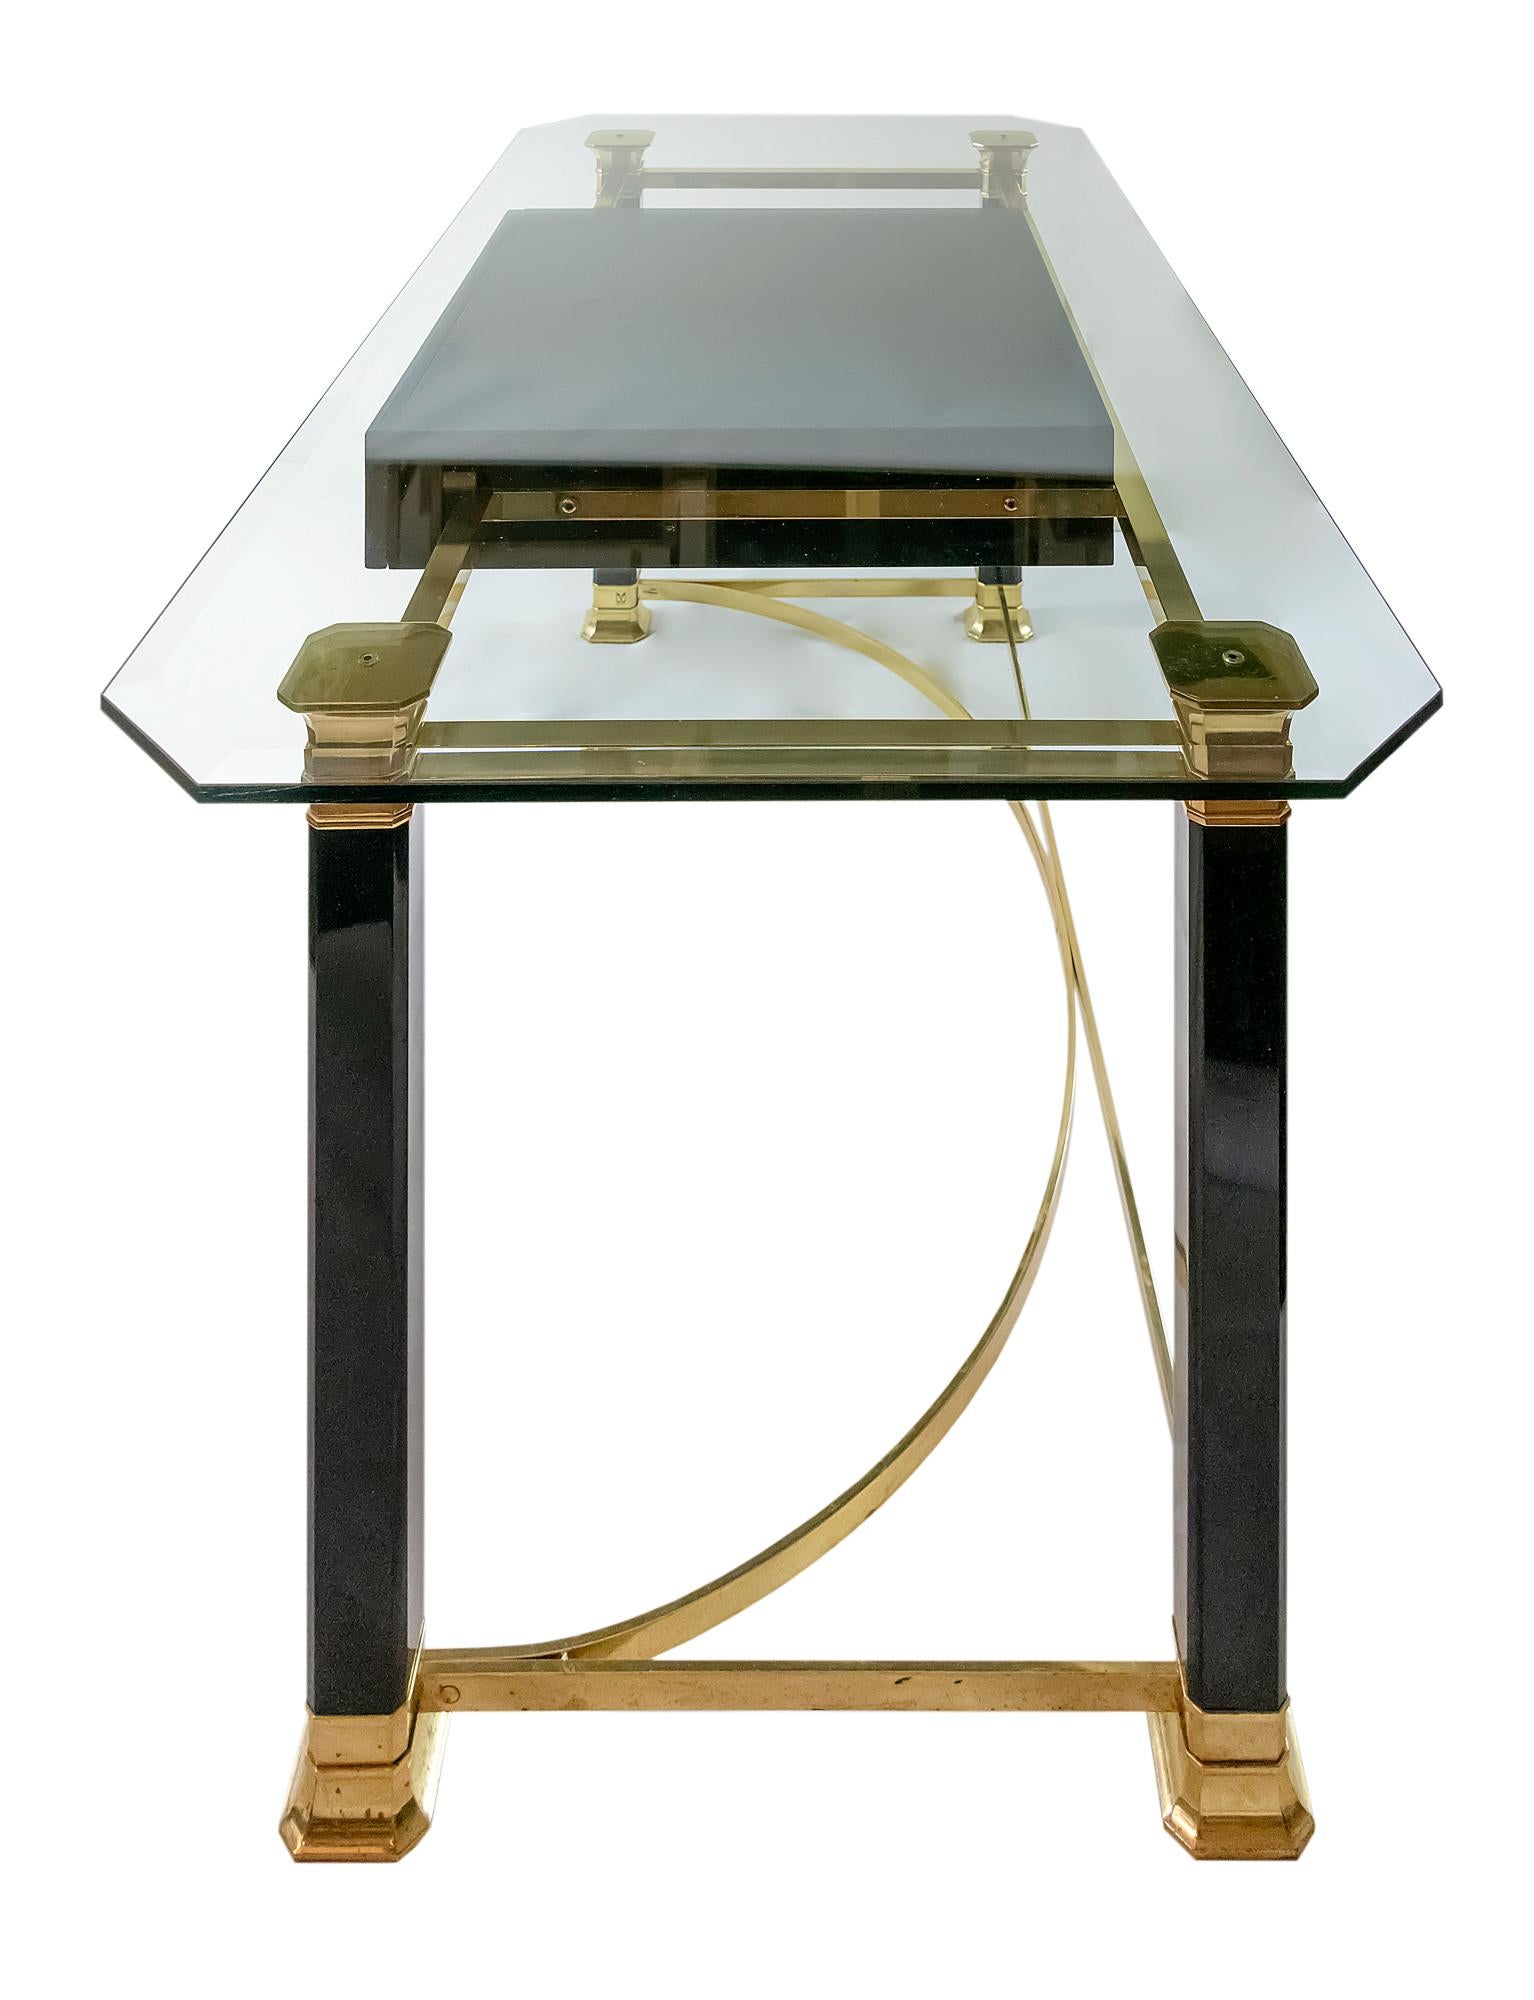 Midcentury Italian desk/writing table is made of brass and glass with one drawer.
The brass is polished and part of legs are in black color varnished finish.
The glass top is thick, faceted and very heavy.
Signed made in Italy.